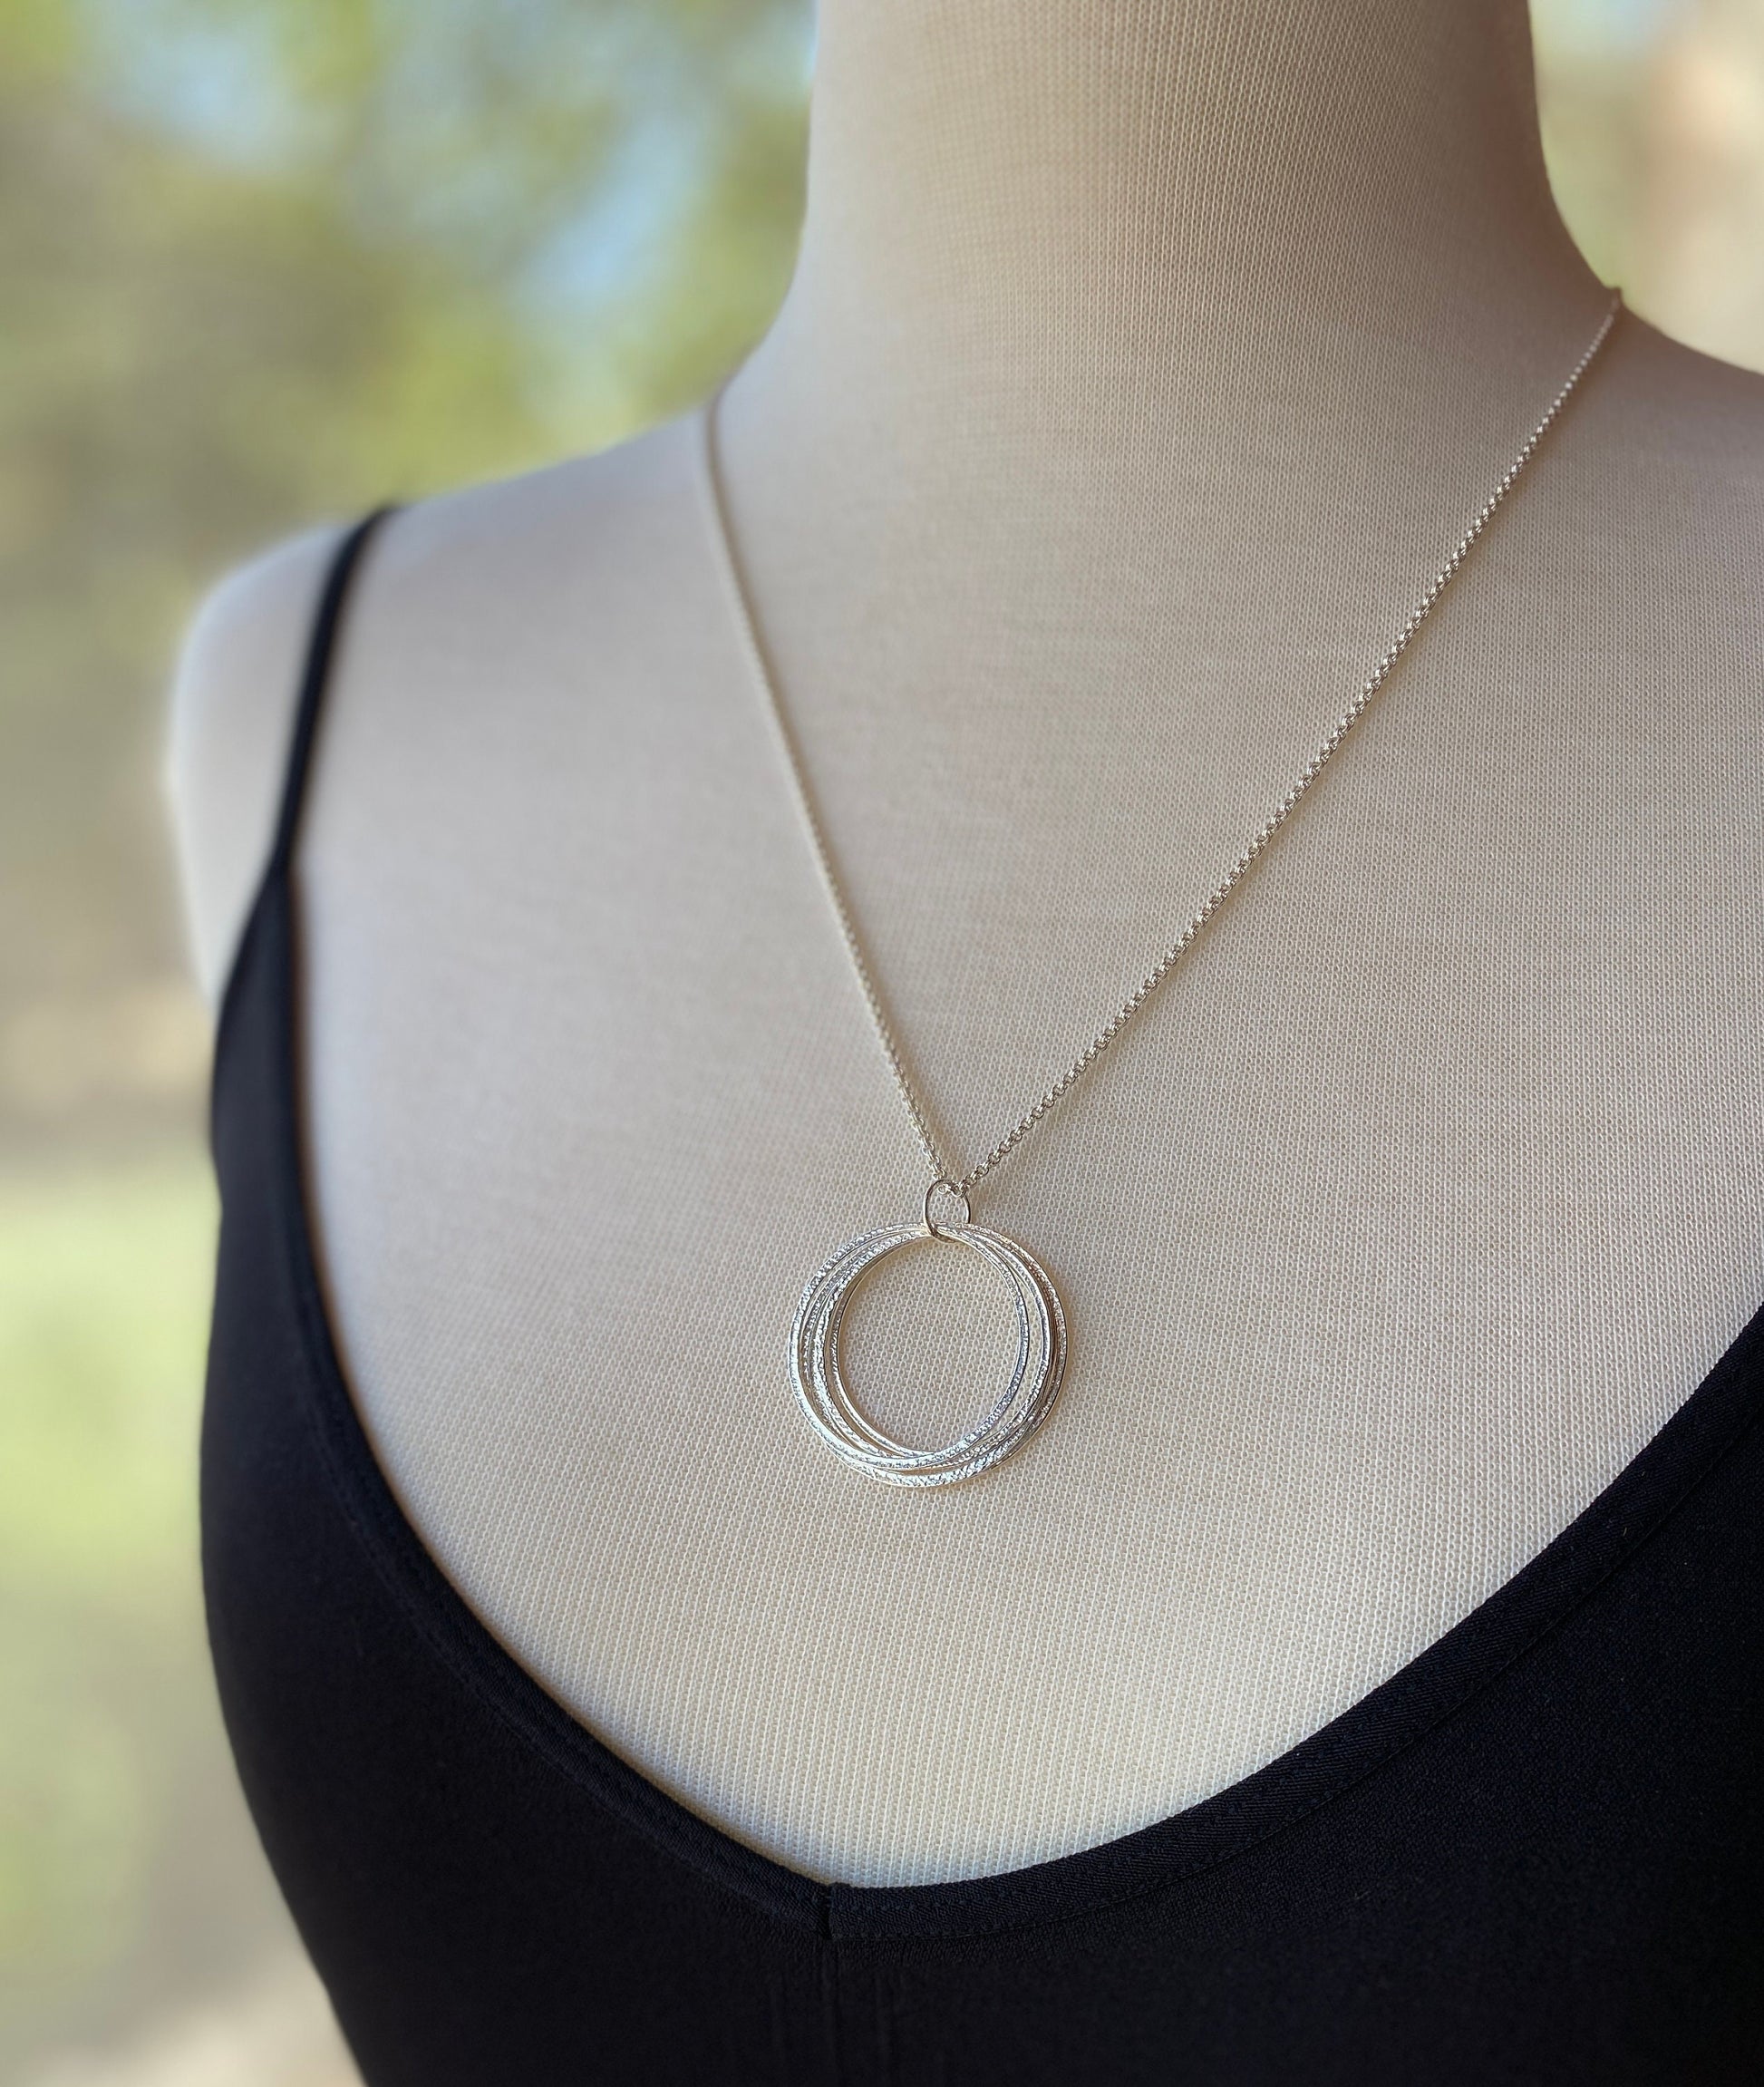 50th Birthday Milestone Necklace, Bold Sterling Silver Handcrafted Sparkly Circles Pendant, 5 Rings for 5 Decades, Large Five Circle Pendant